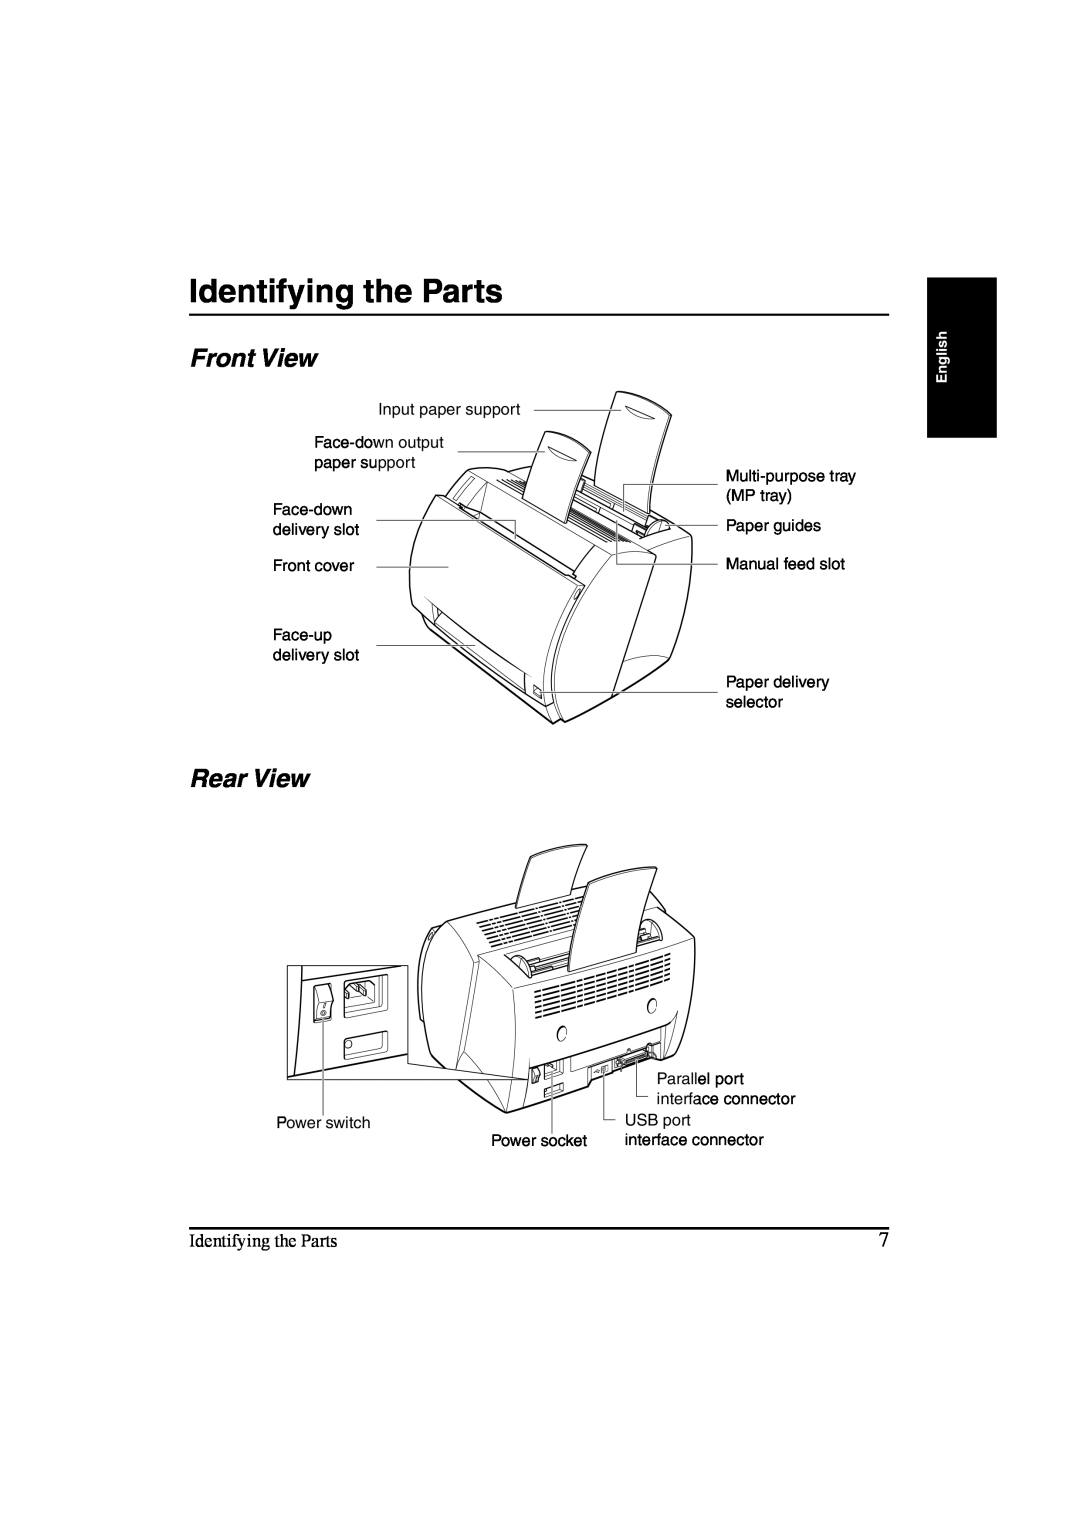 Canon LBP-810 manual Identifying the Parts, Front View, Rear View 